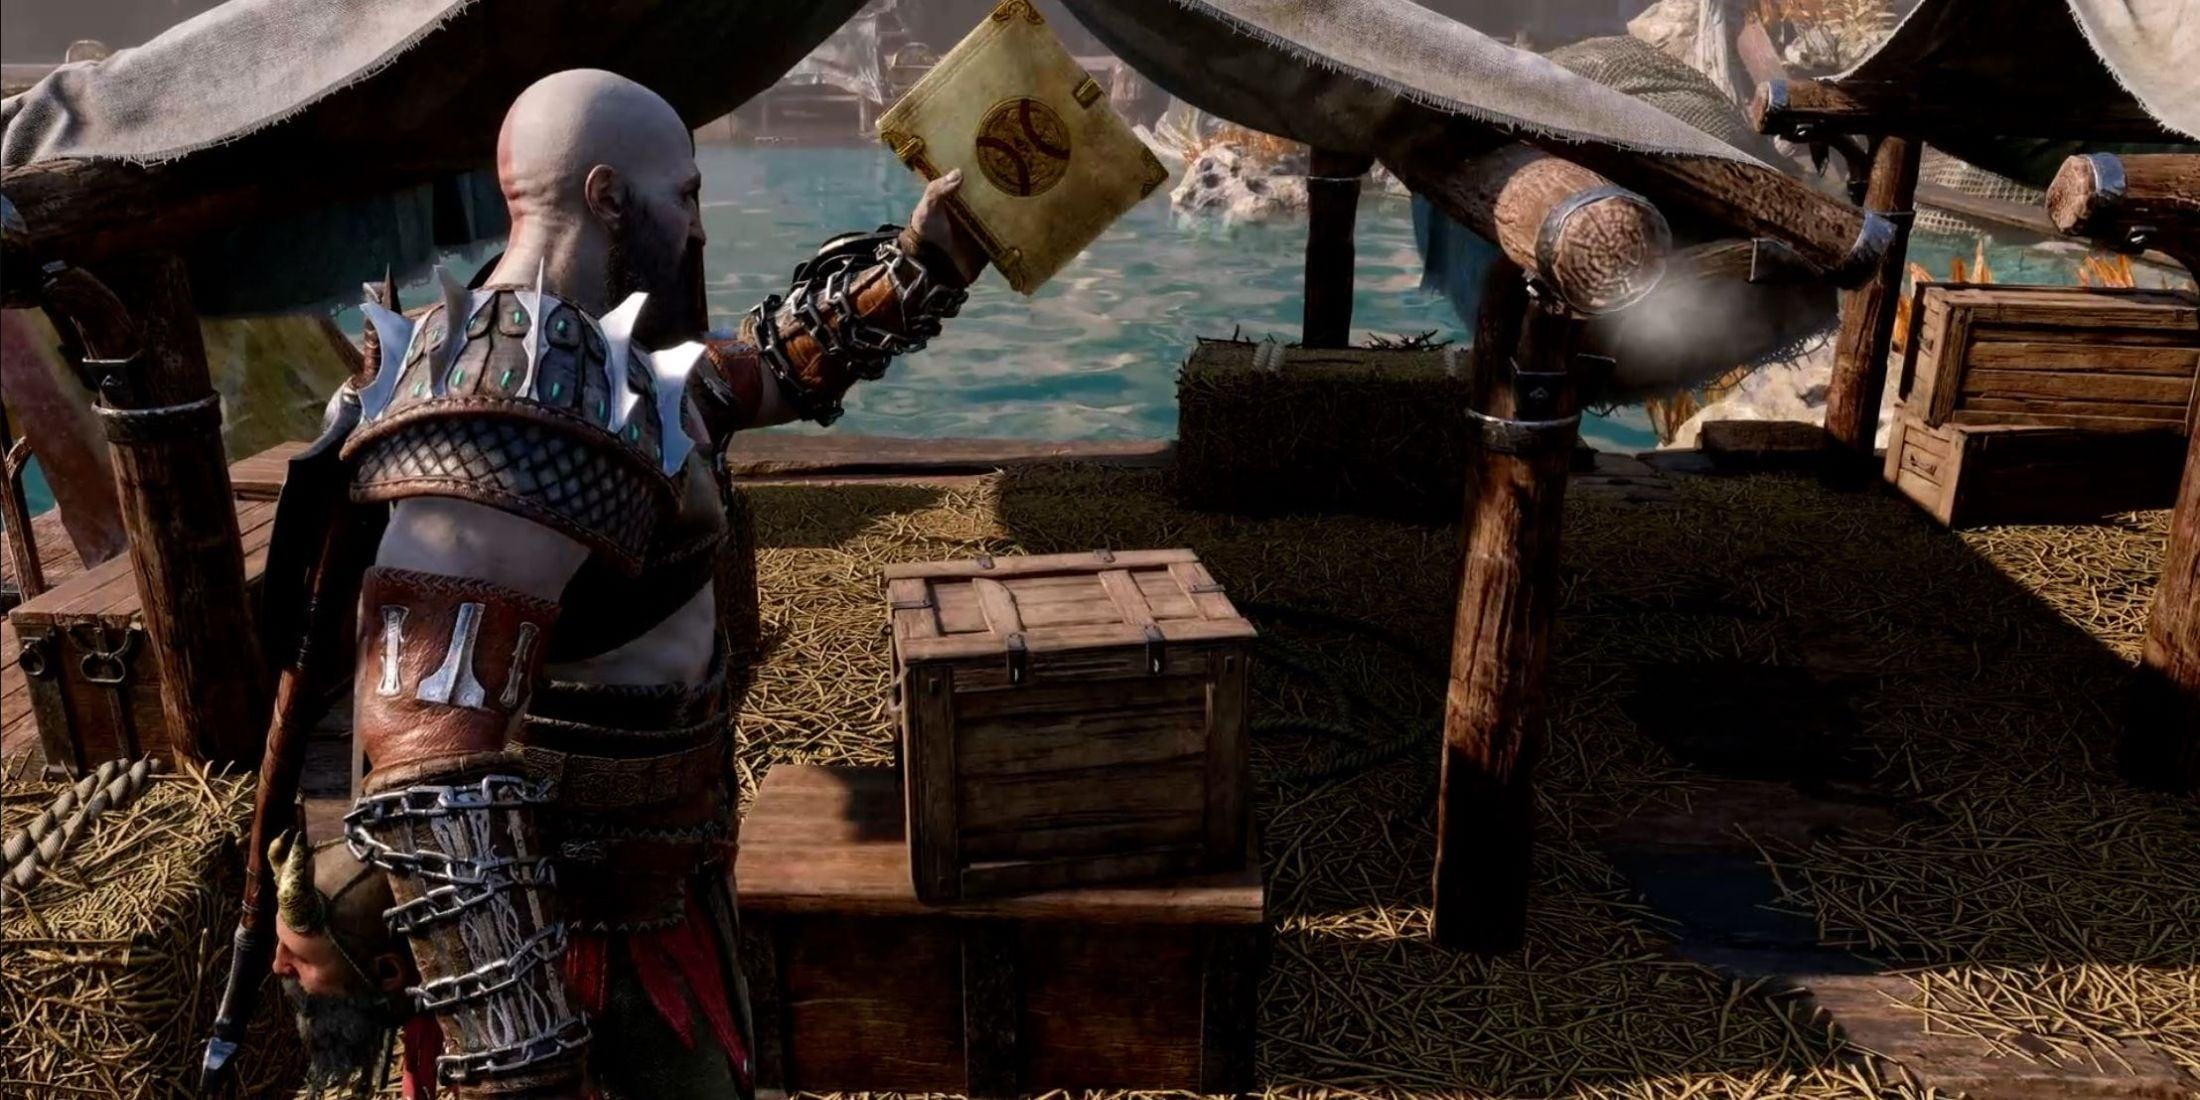 God of War's Kratos holding a book of Kvasir's poems in his left hand.